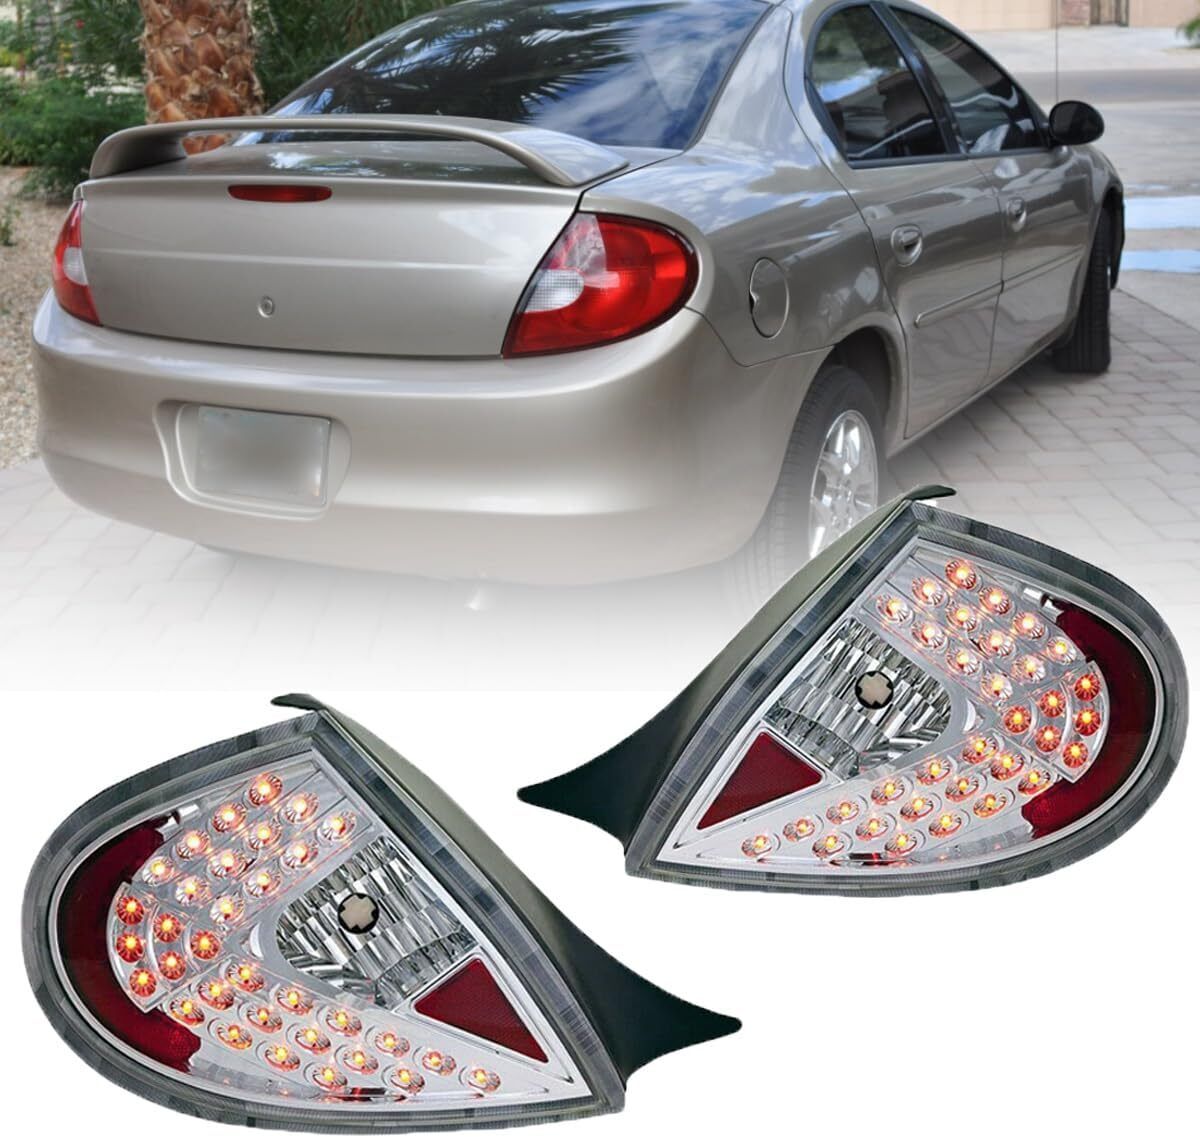 LED Tail Lights For 2000-2002 Dodge Neon 00-01 Plymouth Lamps Chrome Clear Pair